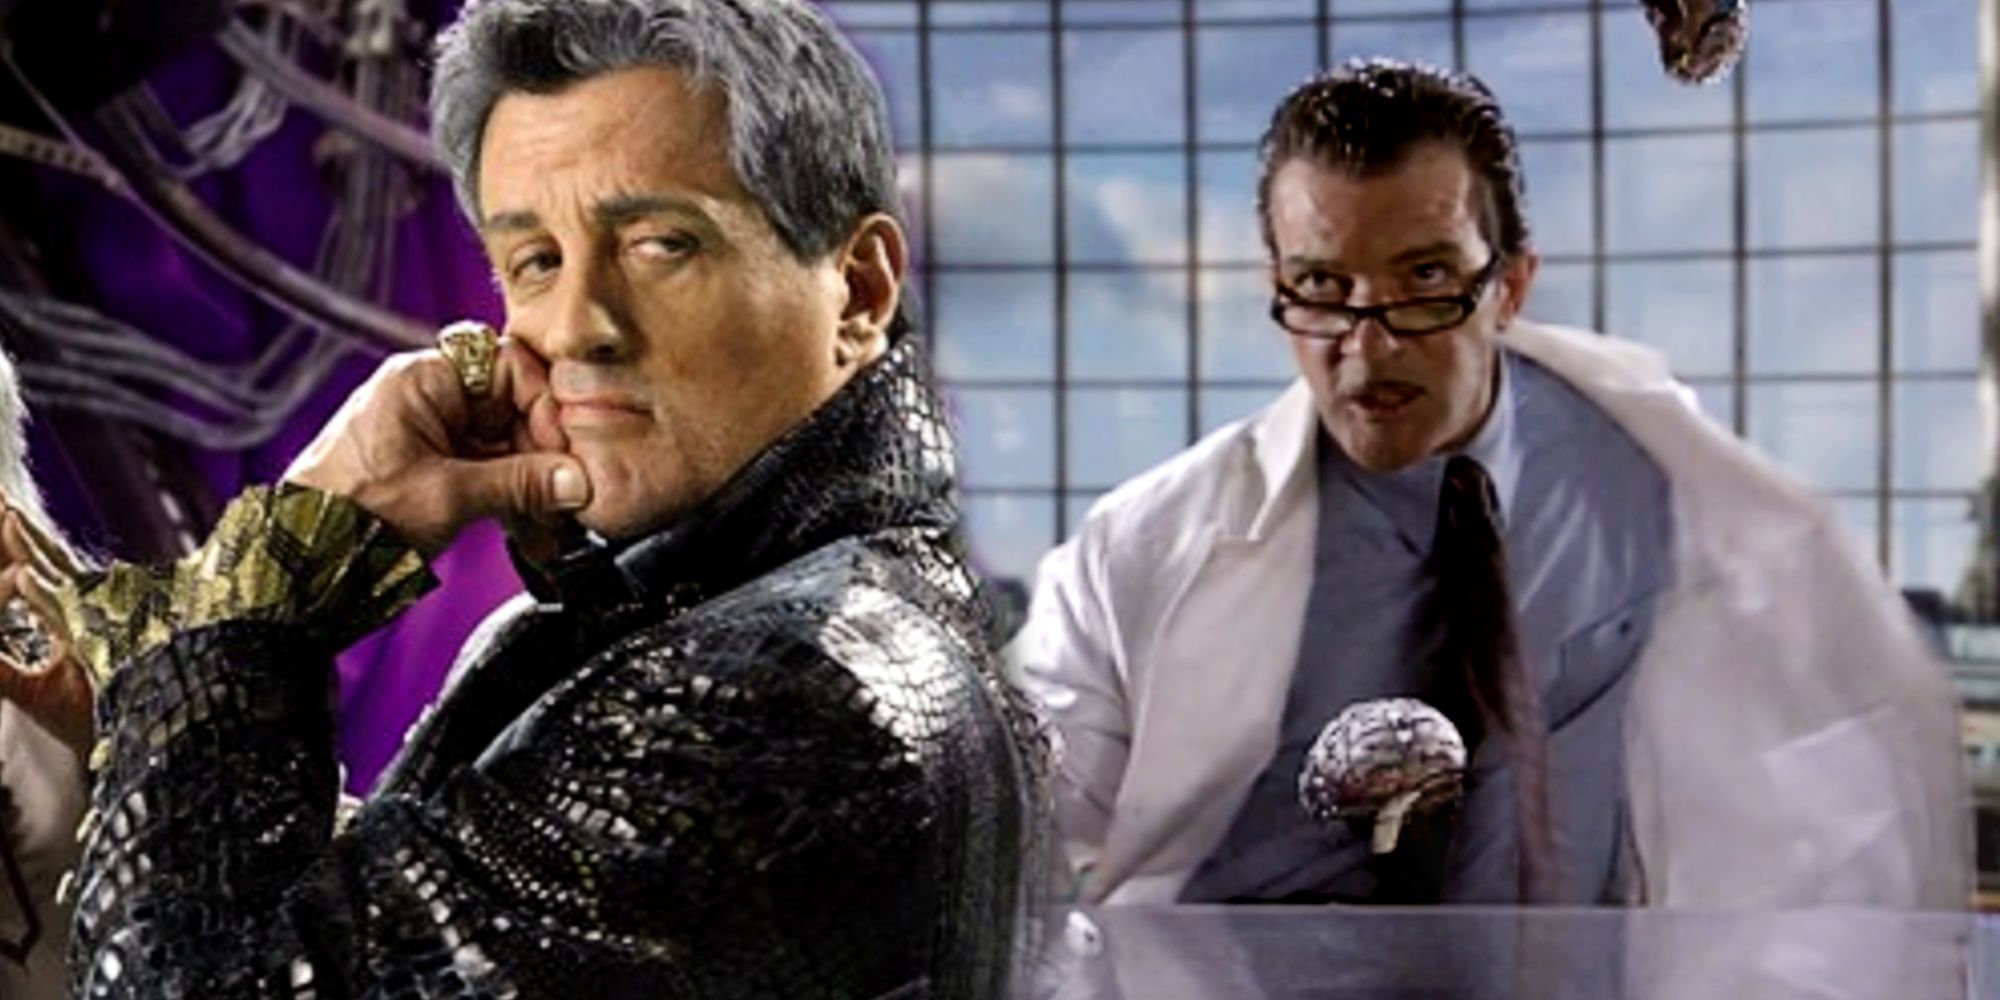 Sylvester Stallone and Antonio Banderas in Spy Kids 3D